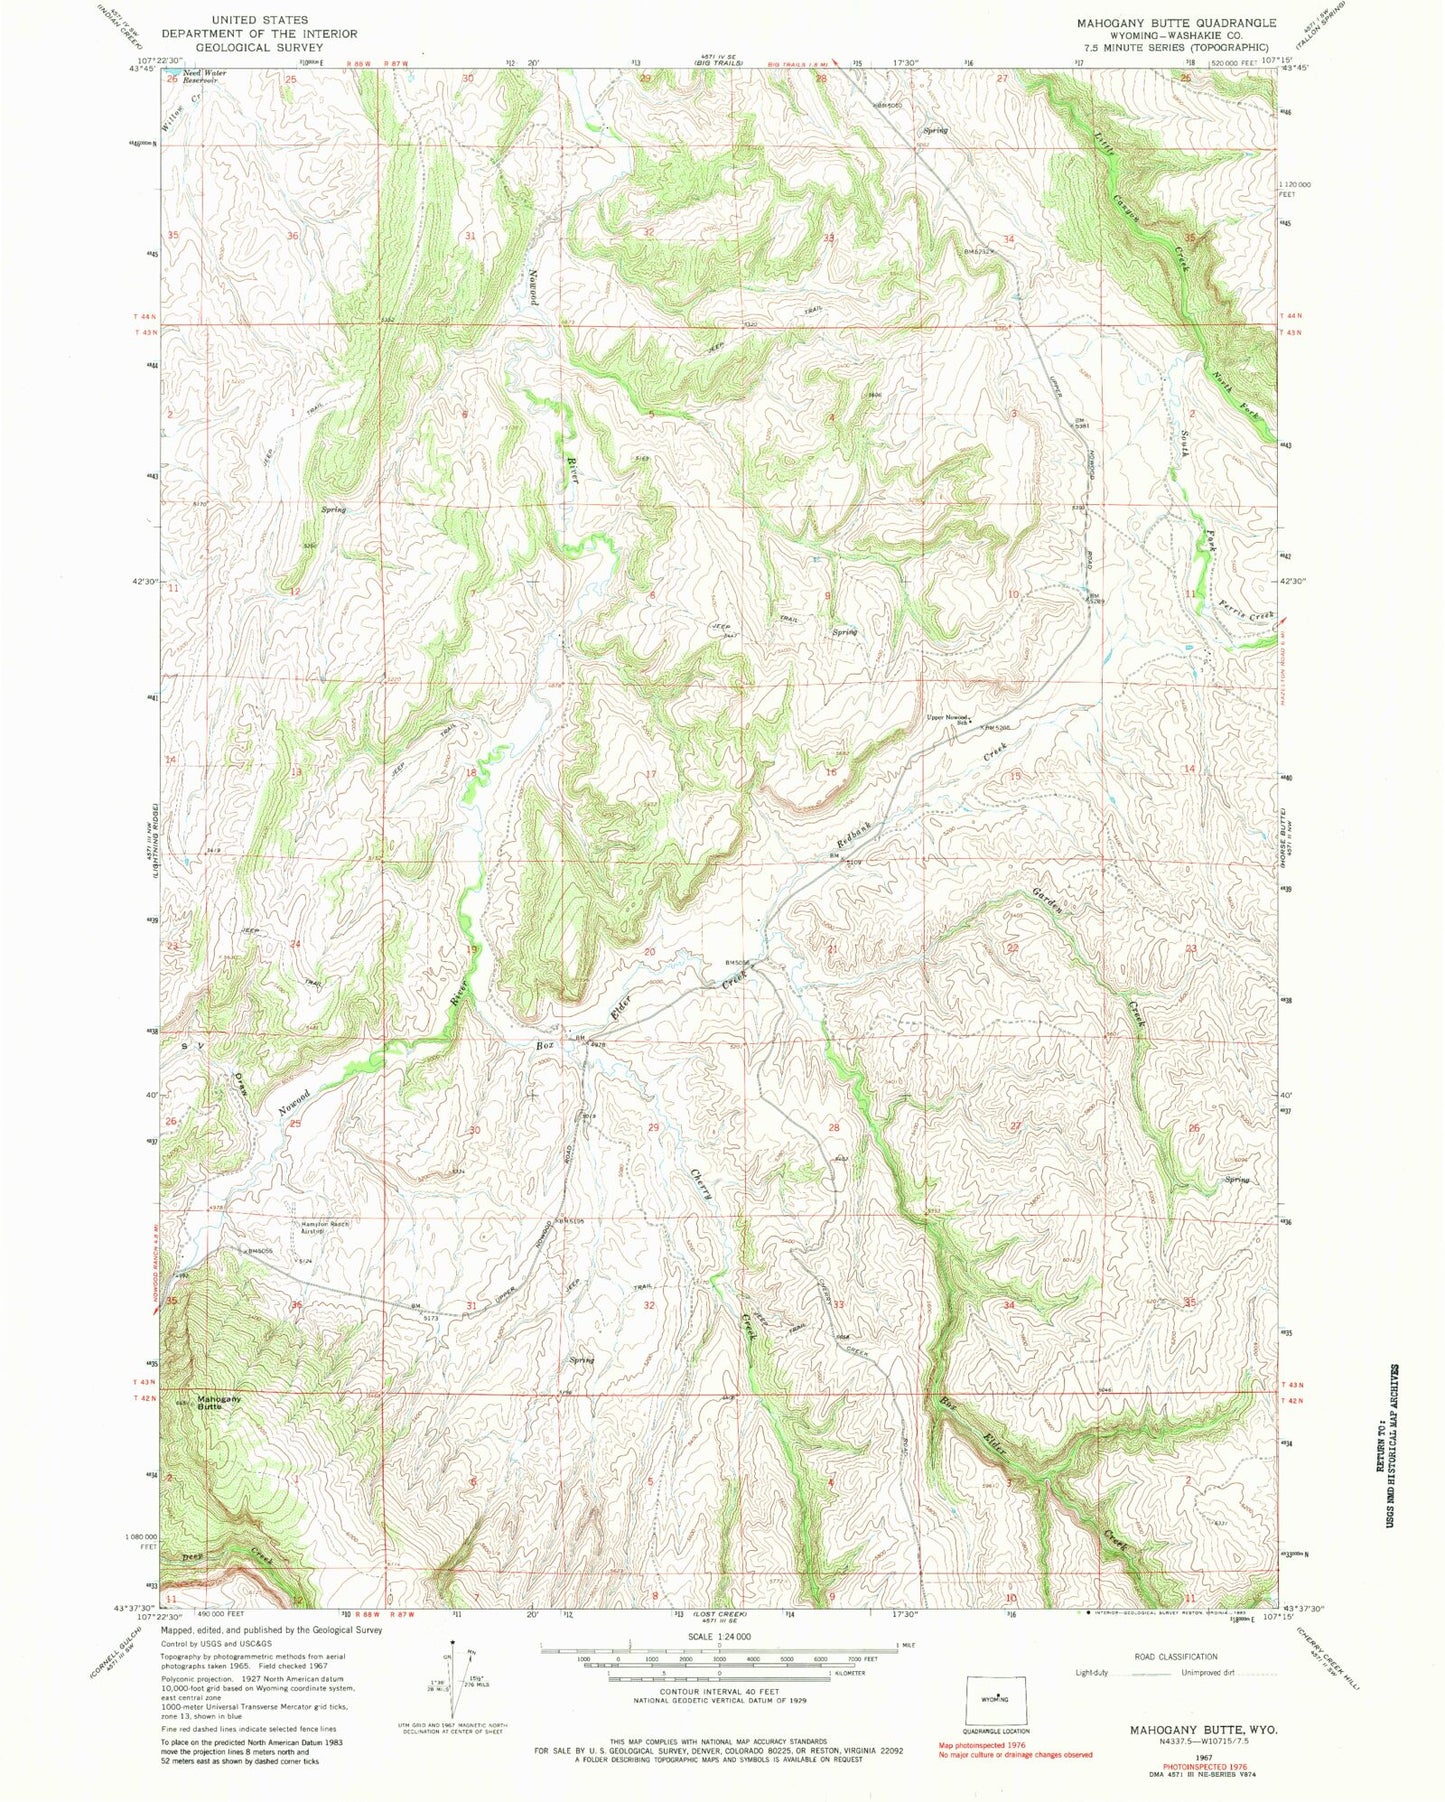 Classic USGS Mahogany Butte Wyoming 7.5'x7.5' Topo Map Image